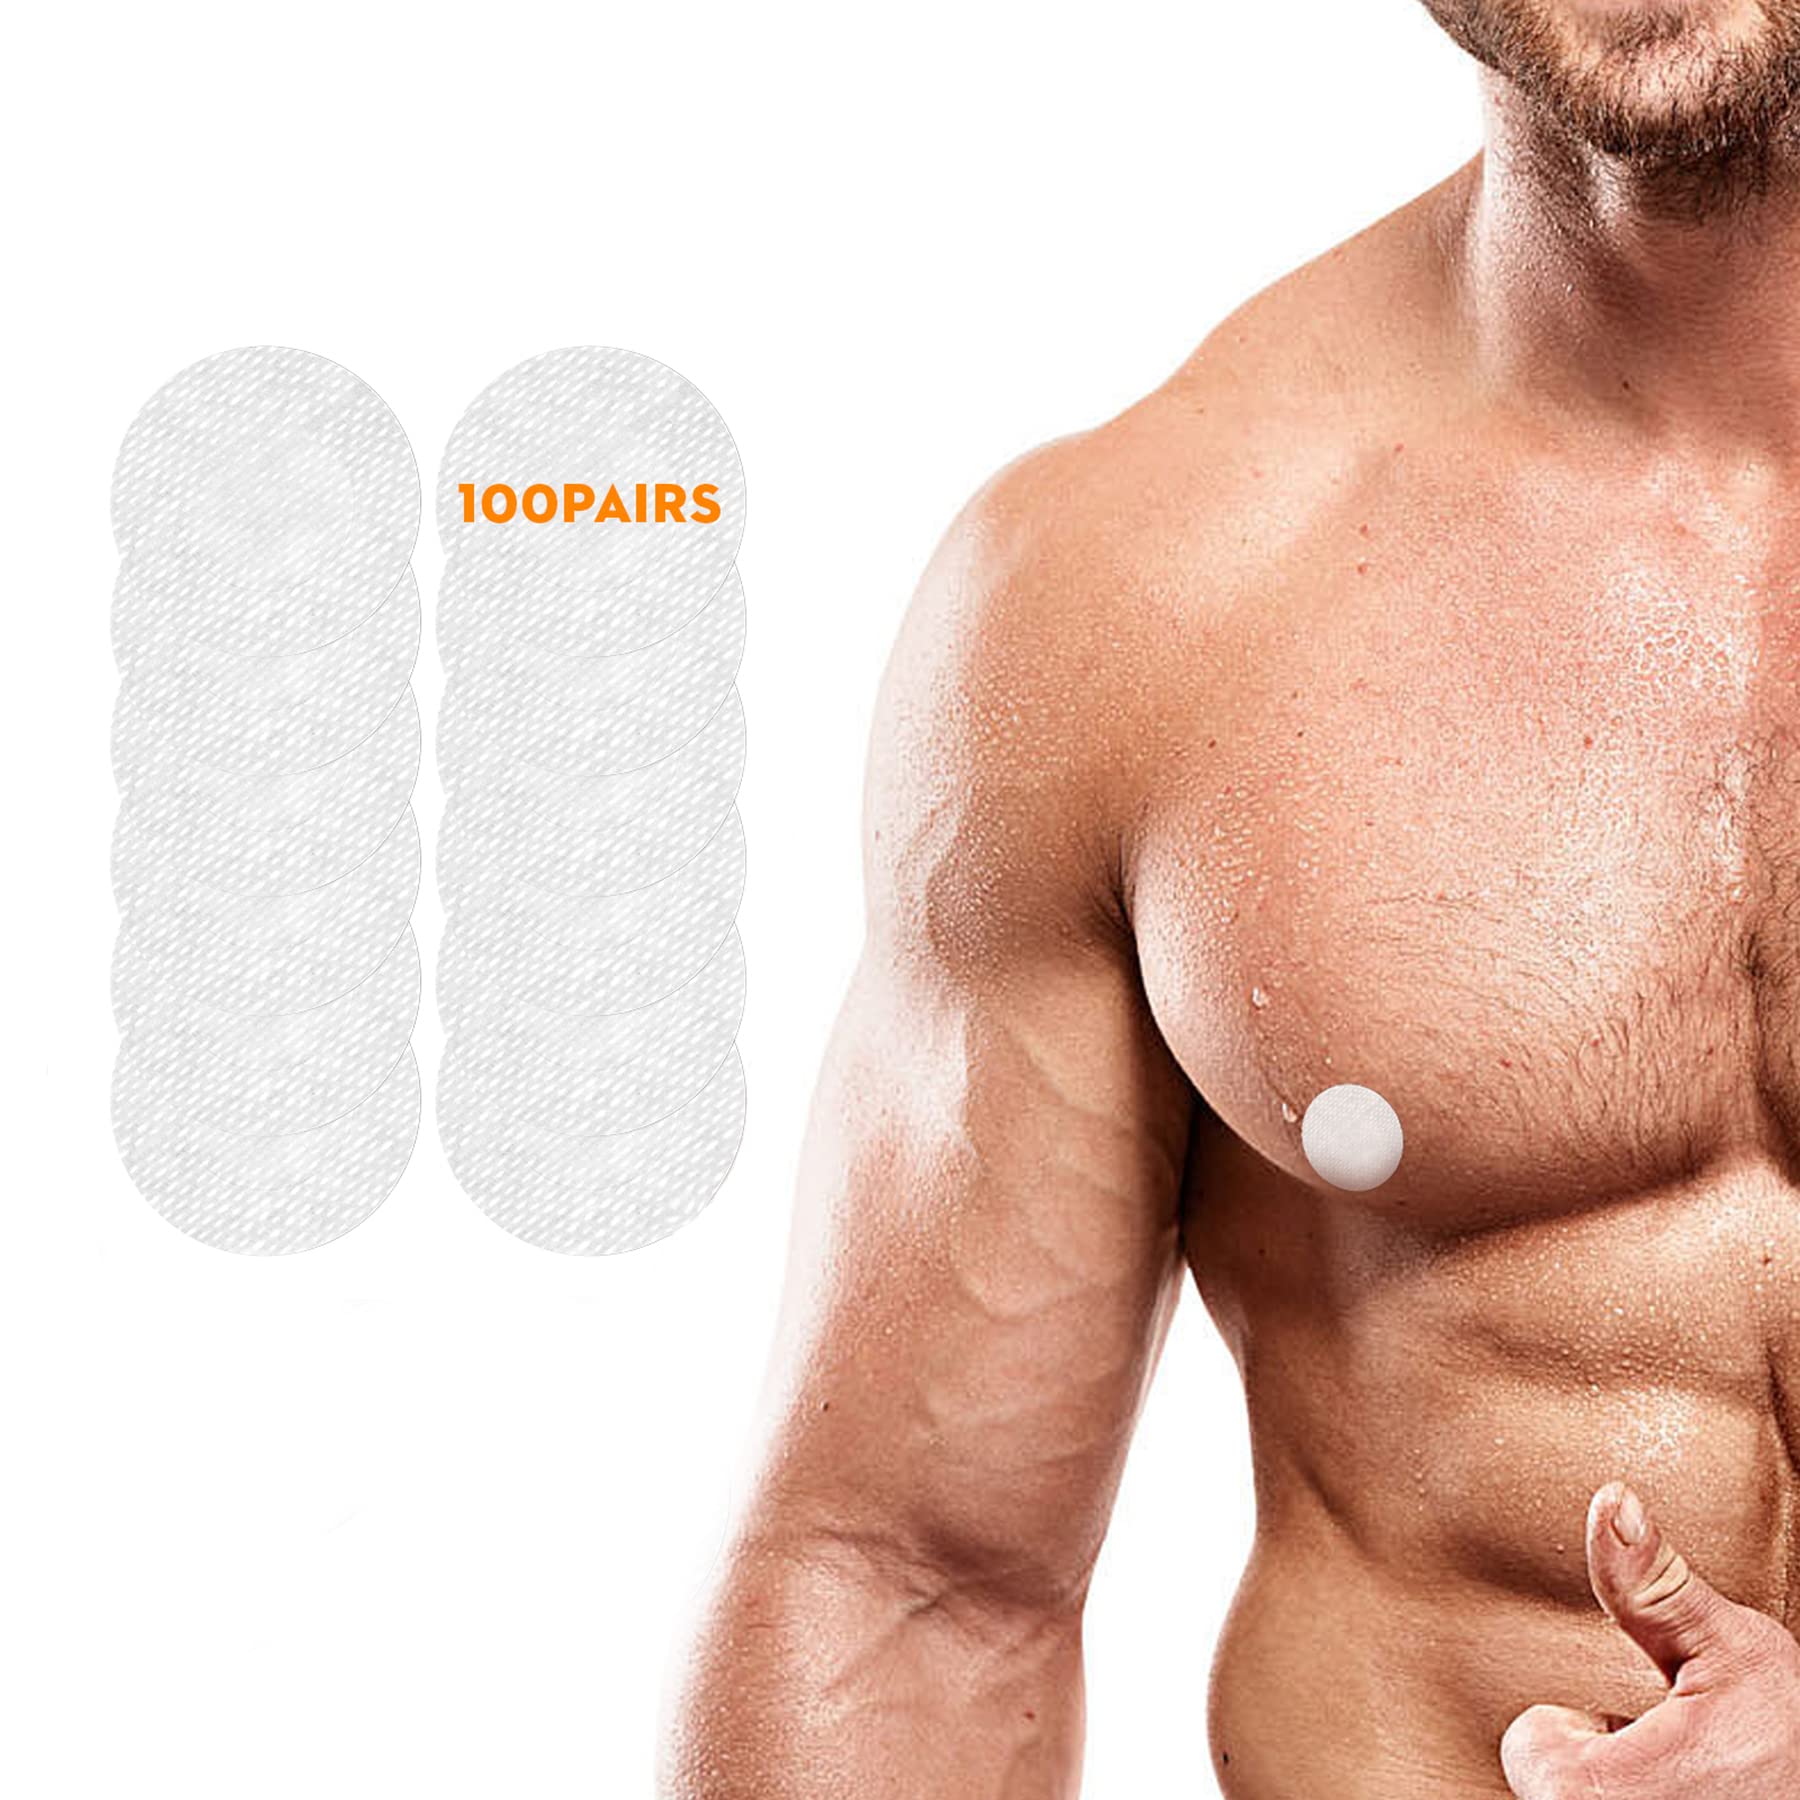 NADEZHDA Nipple Cover for Men Nipple Guard 100 Pairs 1.57 Inches